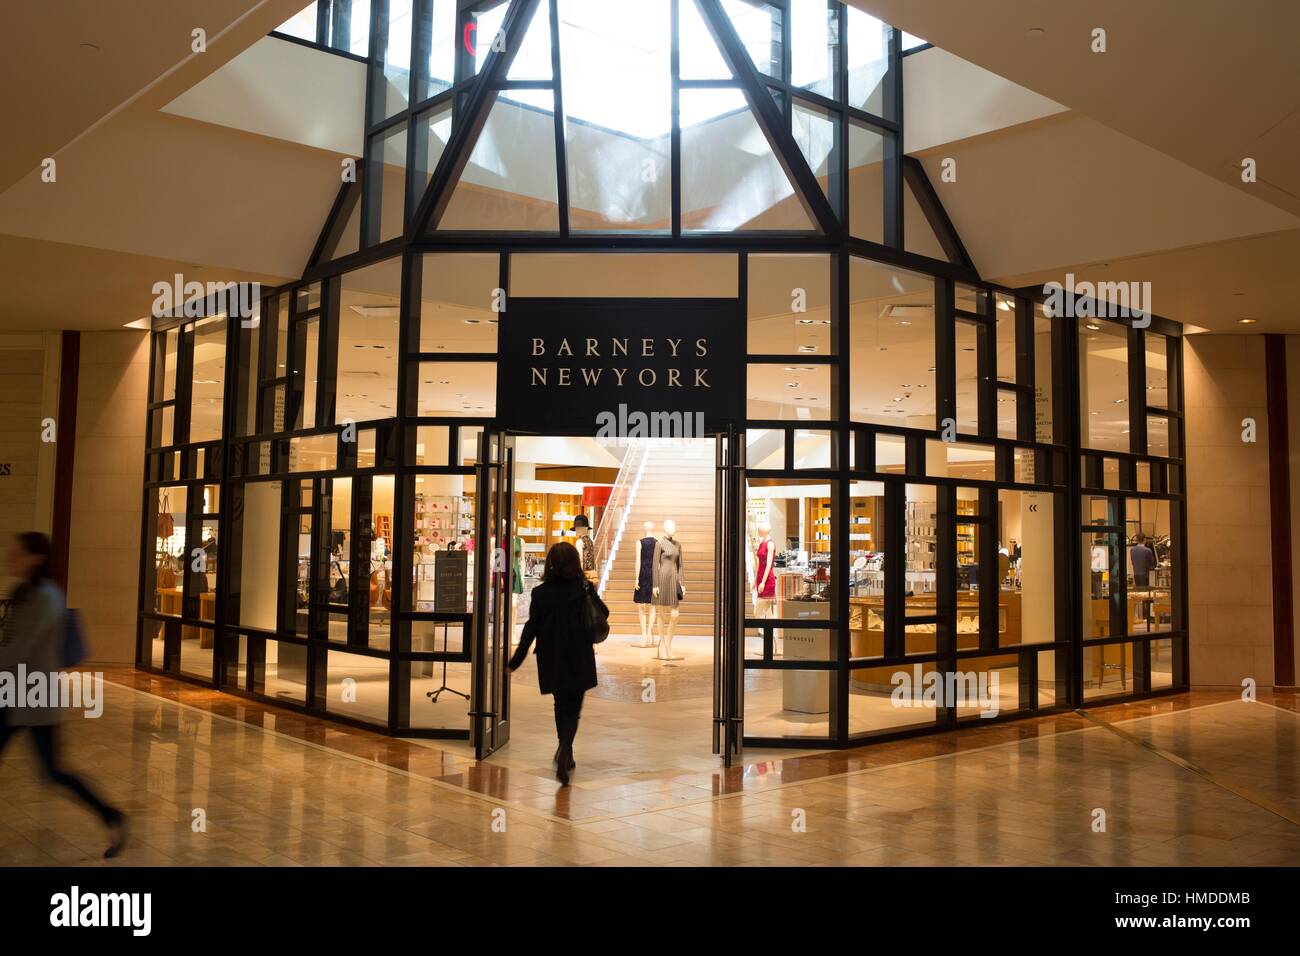 Welcome To Copley Place - A Shopping Center In Boston, MA - A Simon Property